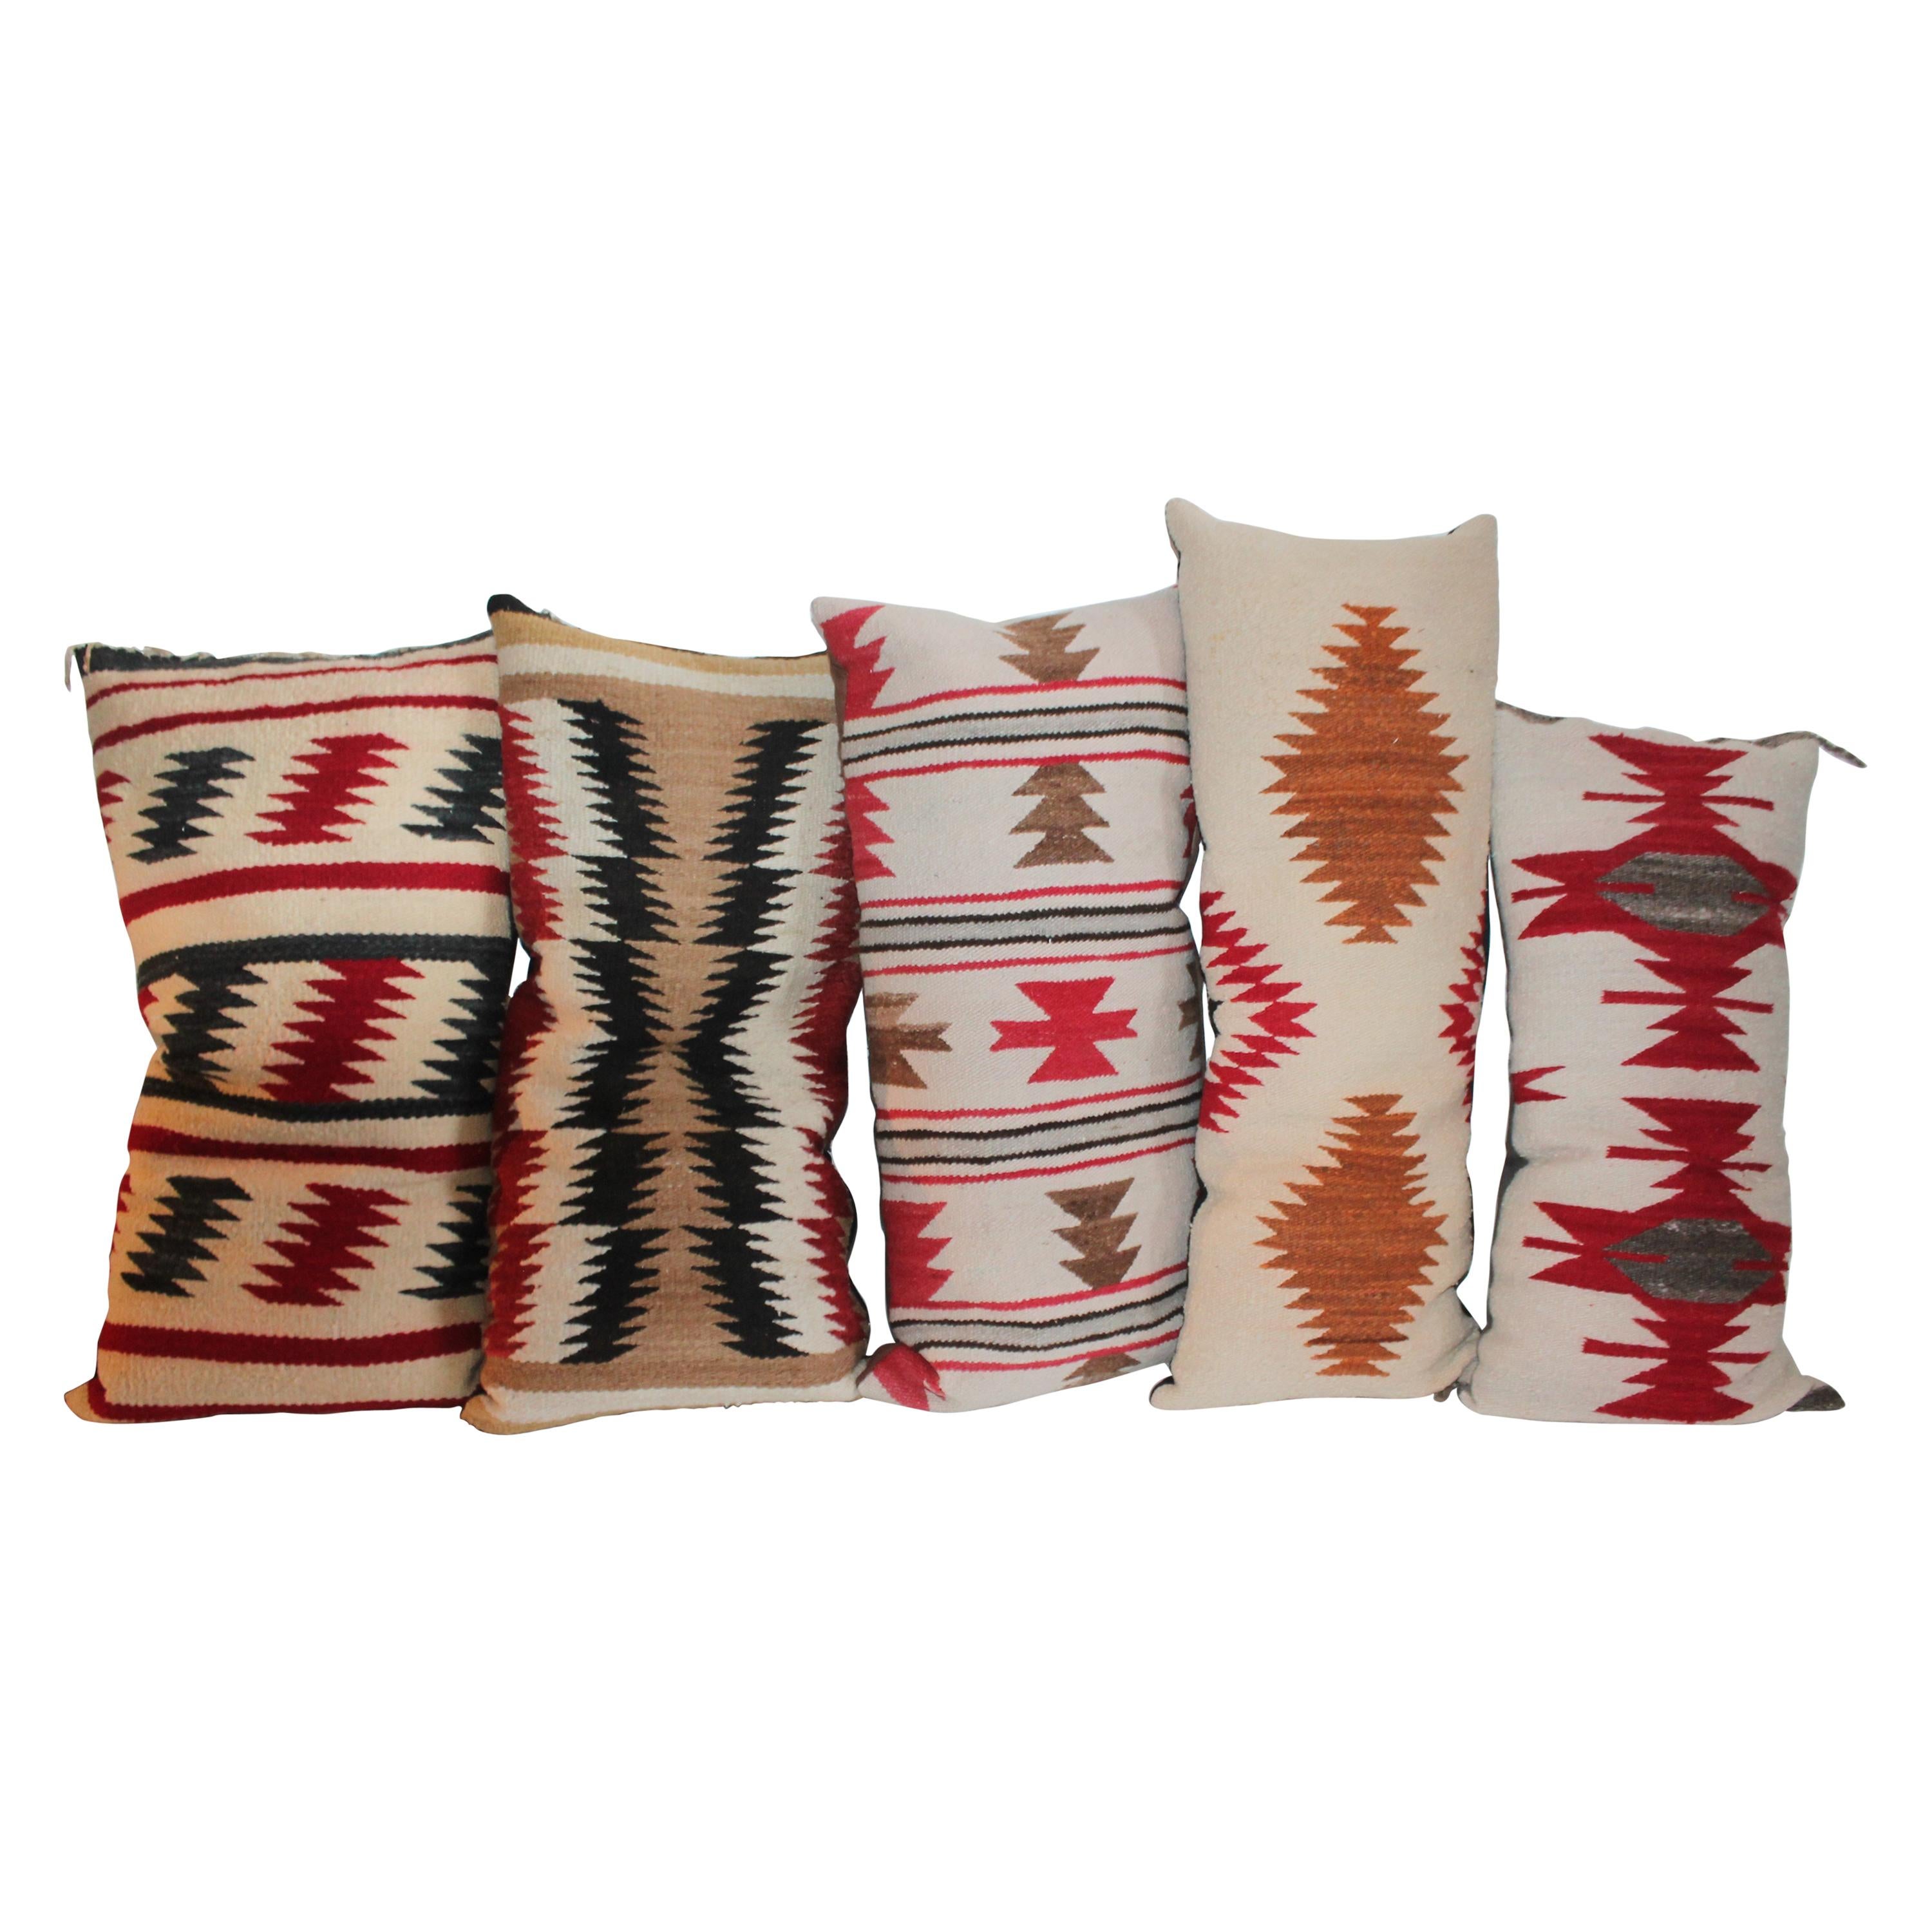 Navajo Indian Weaving Bolster Pillows, Collection of Five